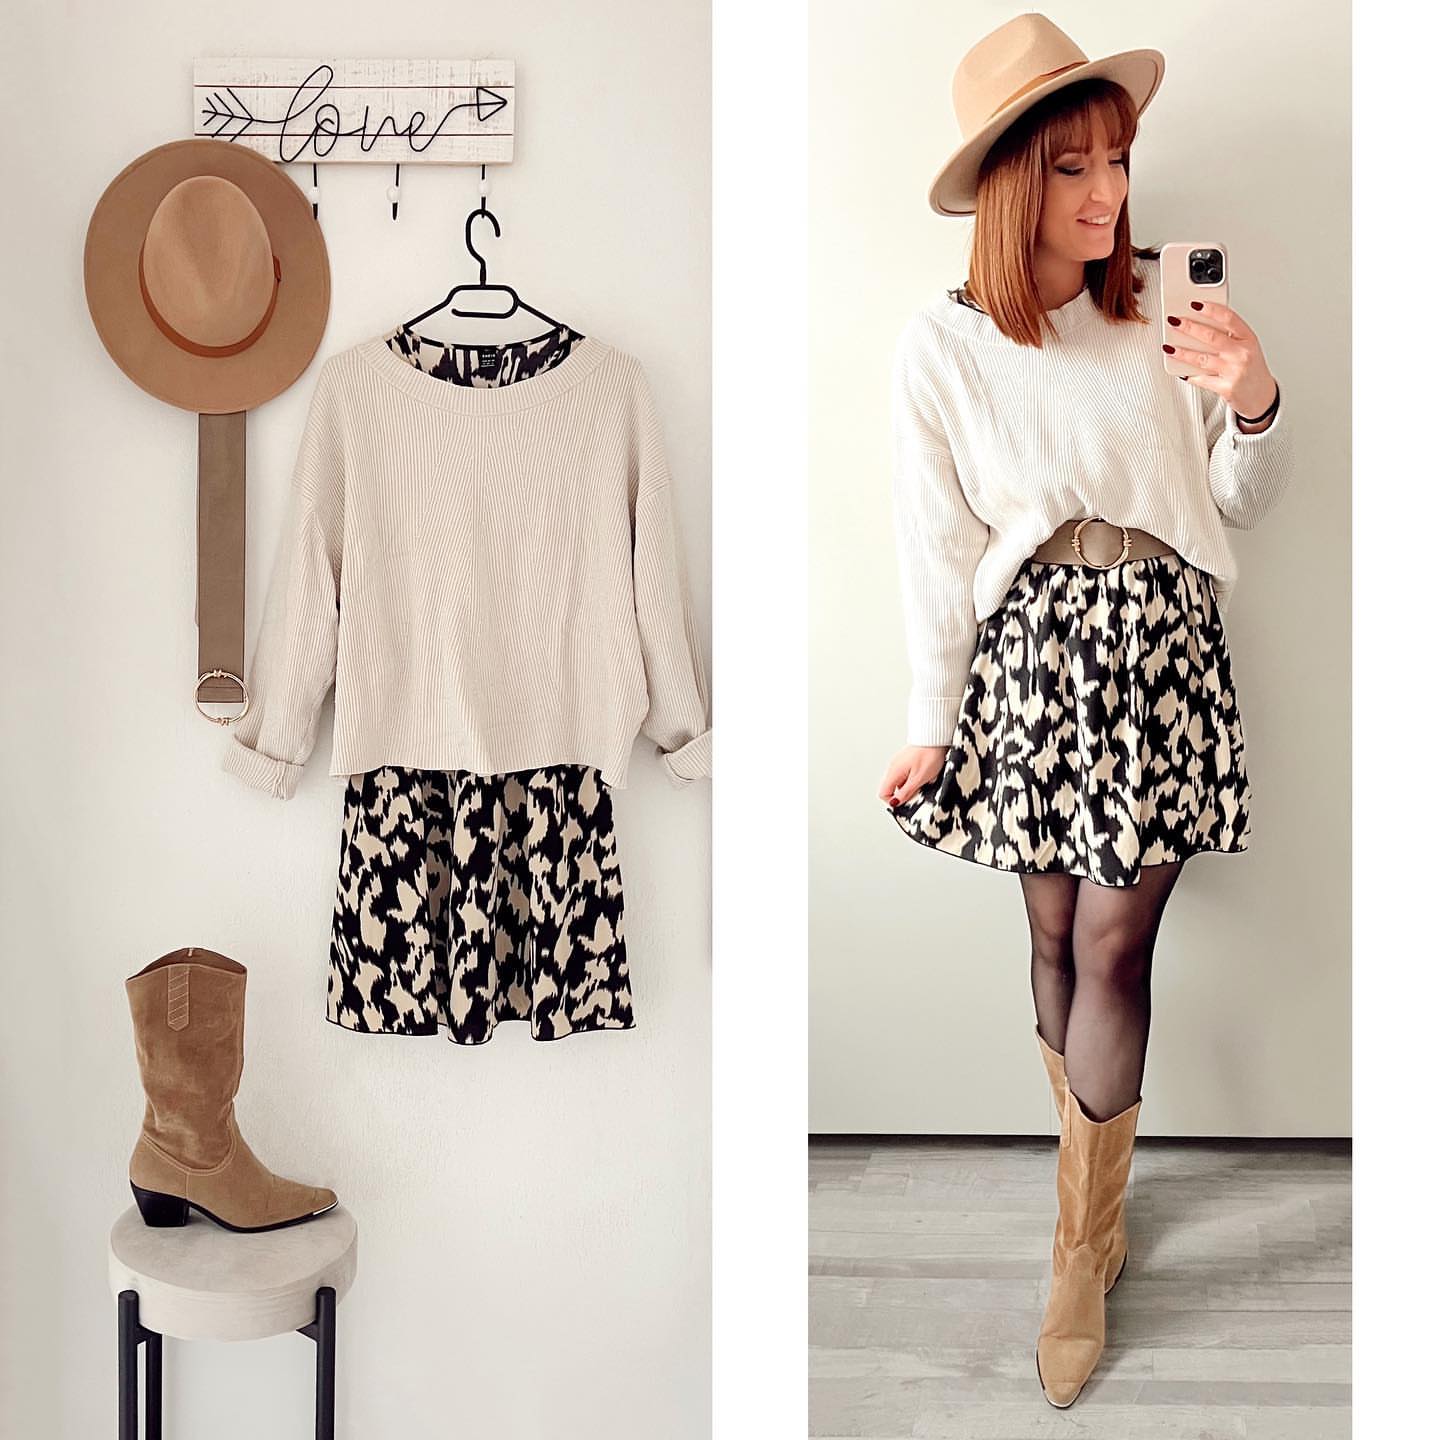 outfit inspiration 3